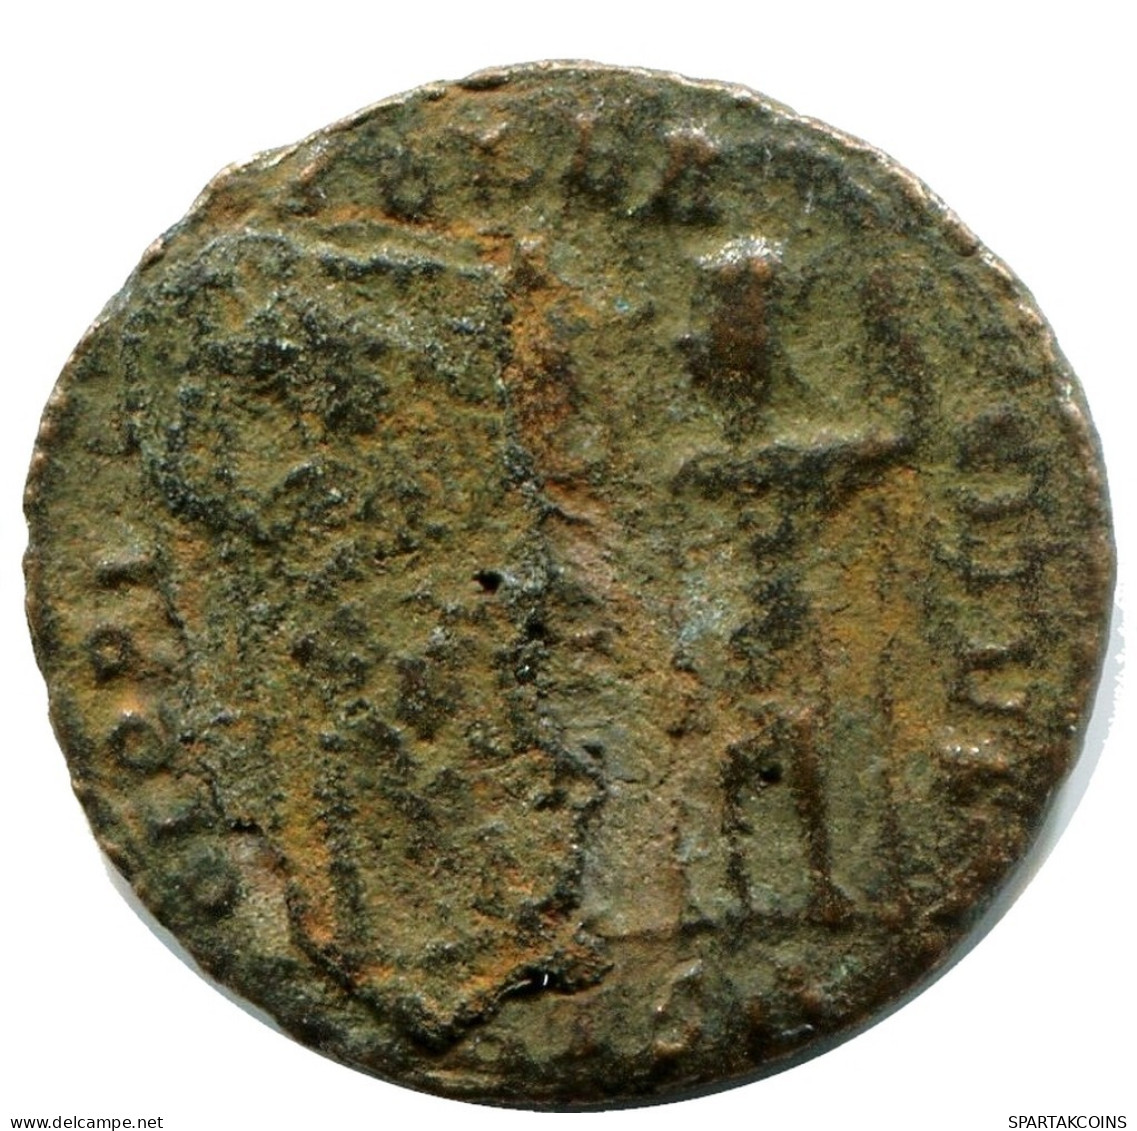 CONSTANS MINTED IN THESSALONICA FOUND IN IHNASYAH HOARD EGYPT #ANC11882.14.E.A - L'Empire Chrétien (307 à 363)